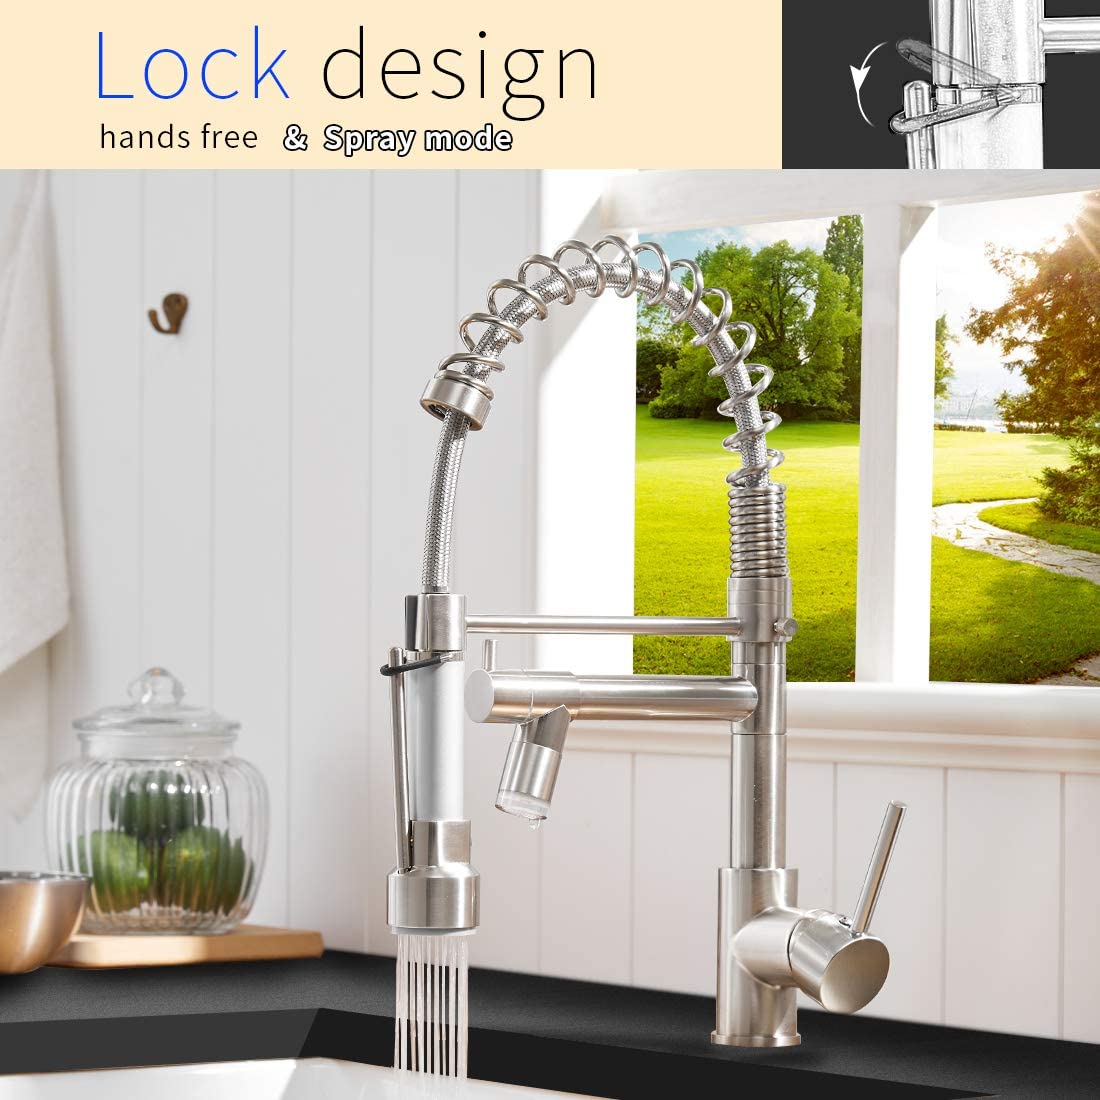  FLG Commercial Pull Down Kitchen Faucet Sprayer with LED Light,Brushed Nickel